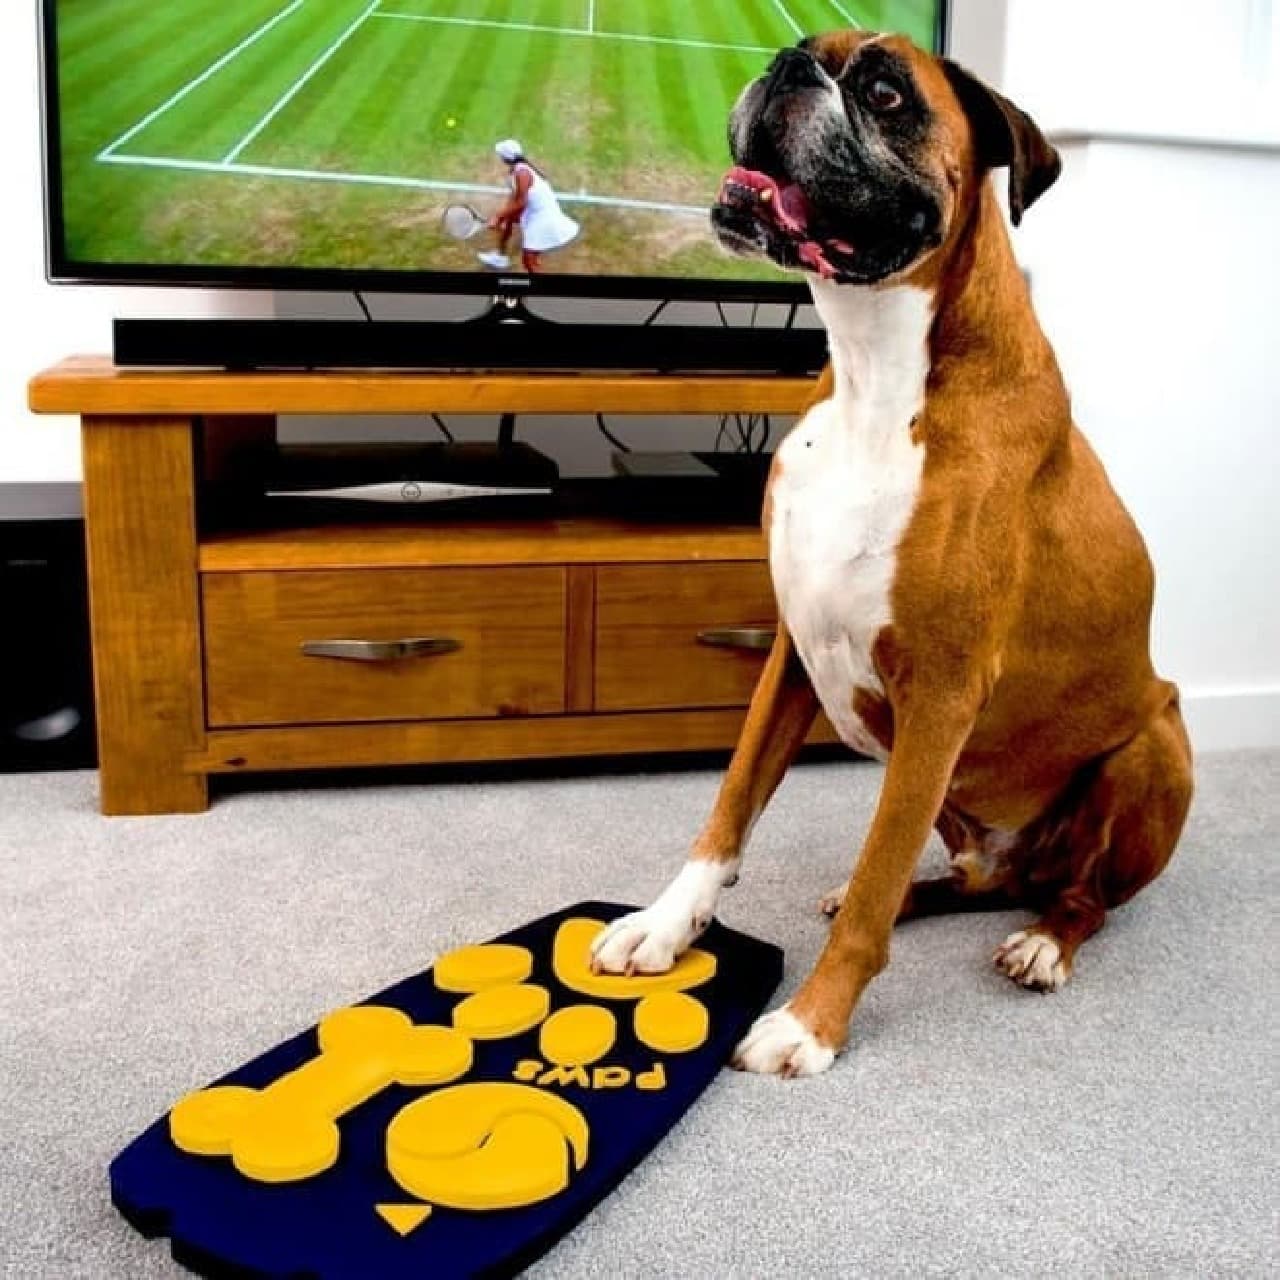 TV remote control for dogs developed by ped food maker Wagg Foods